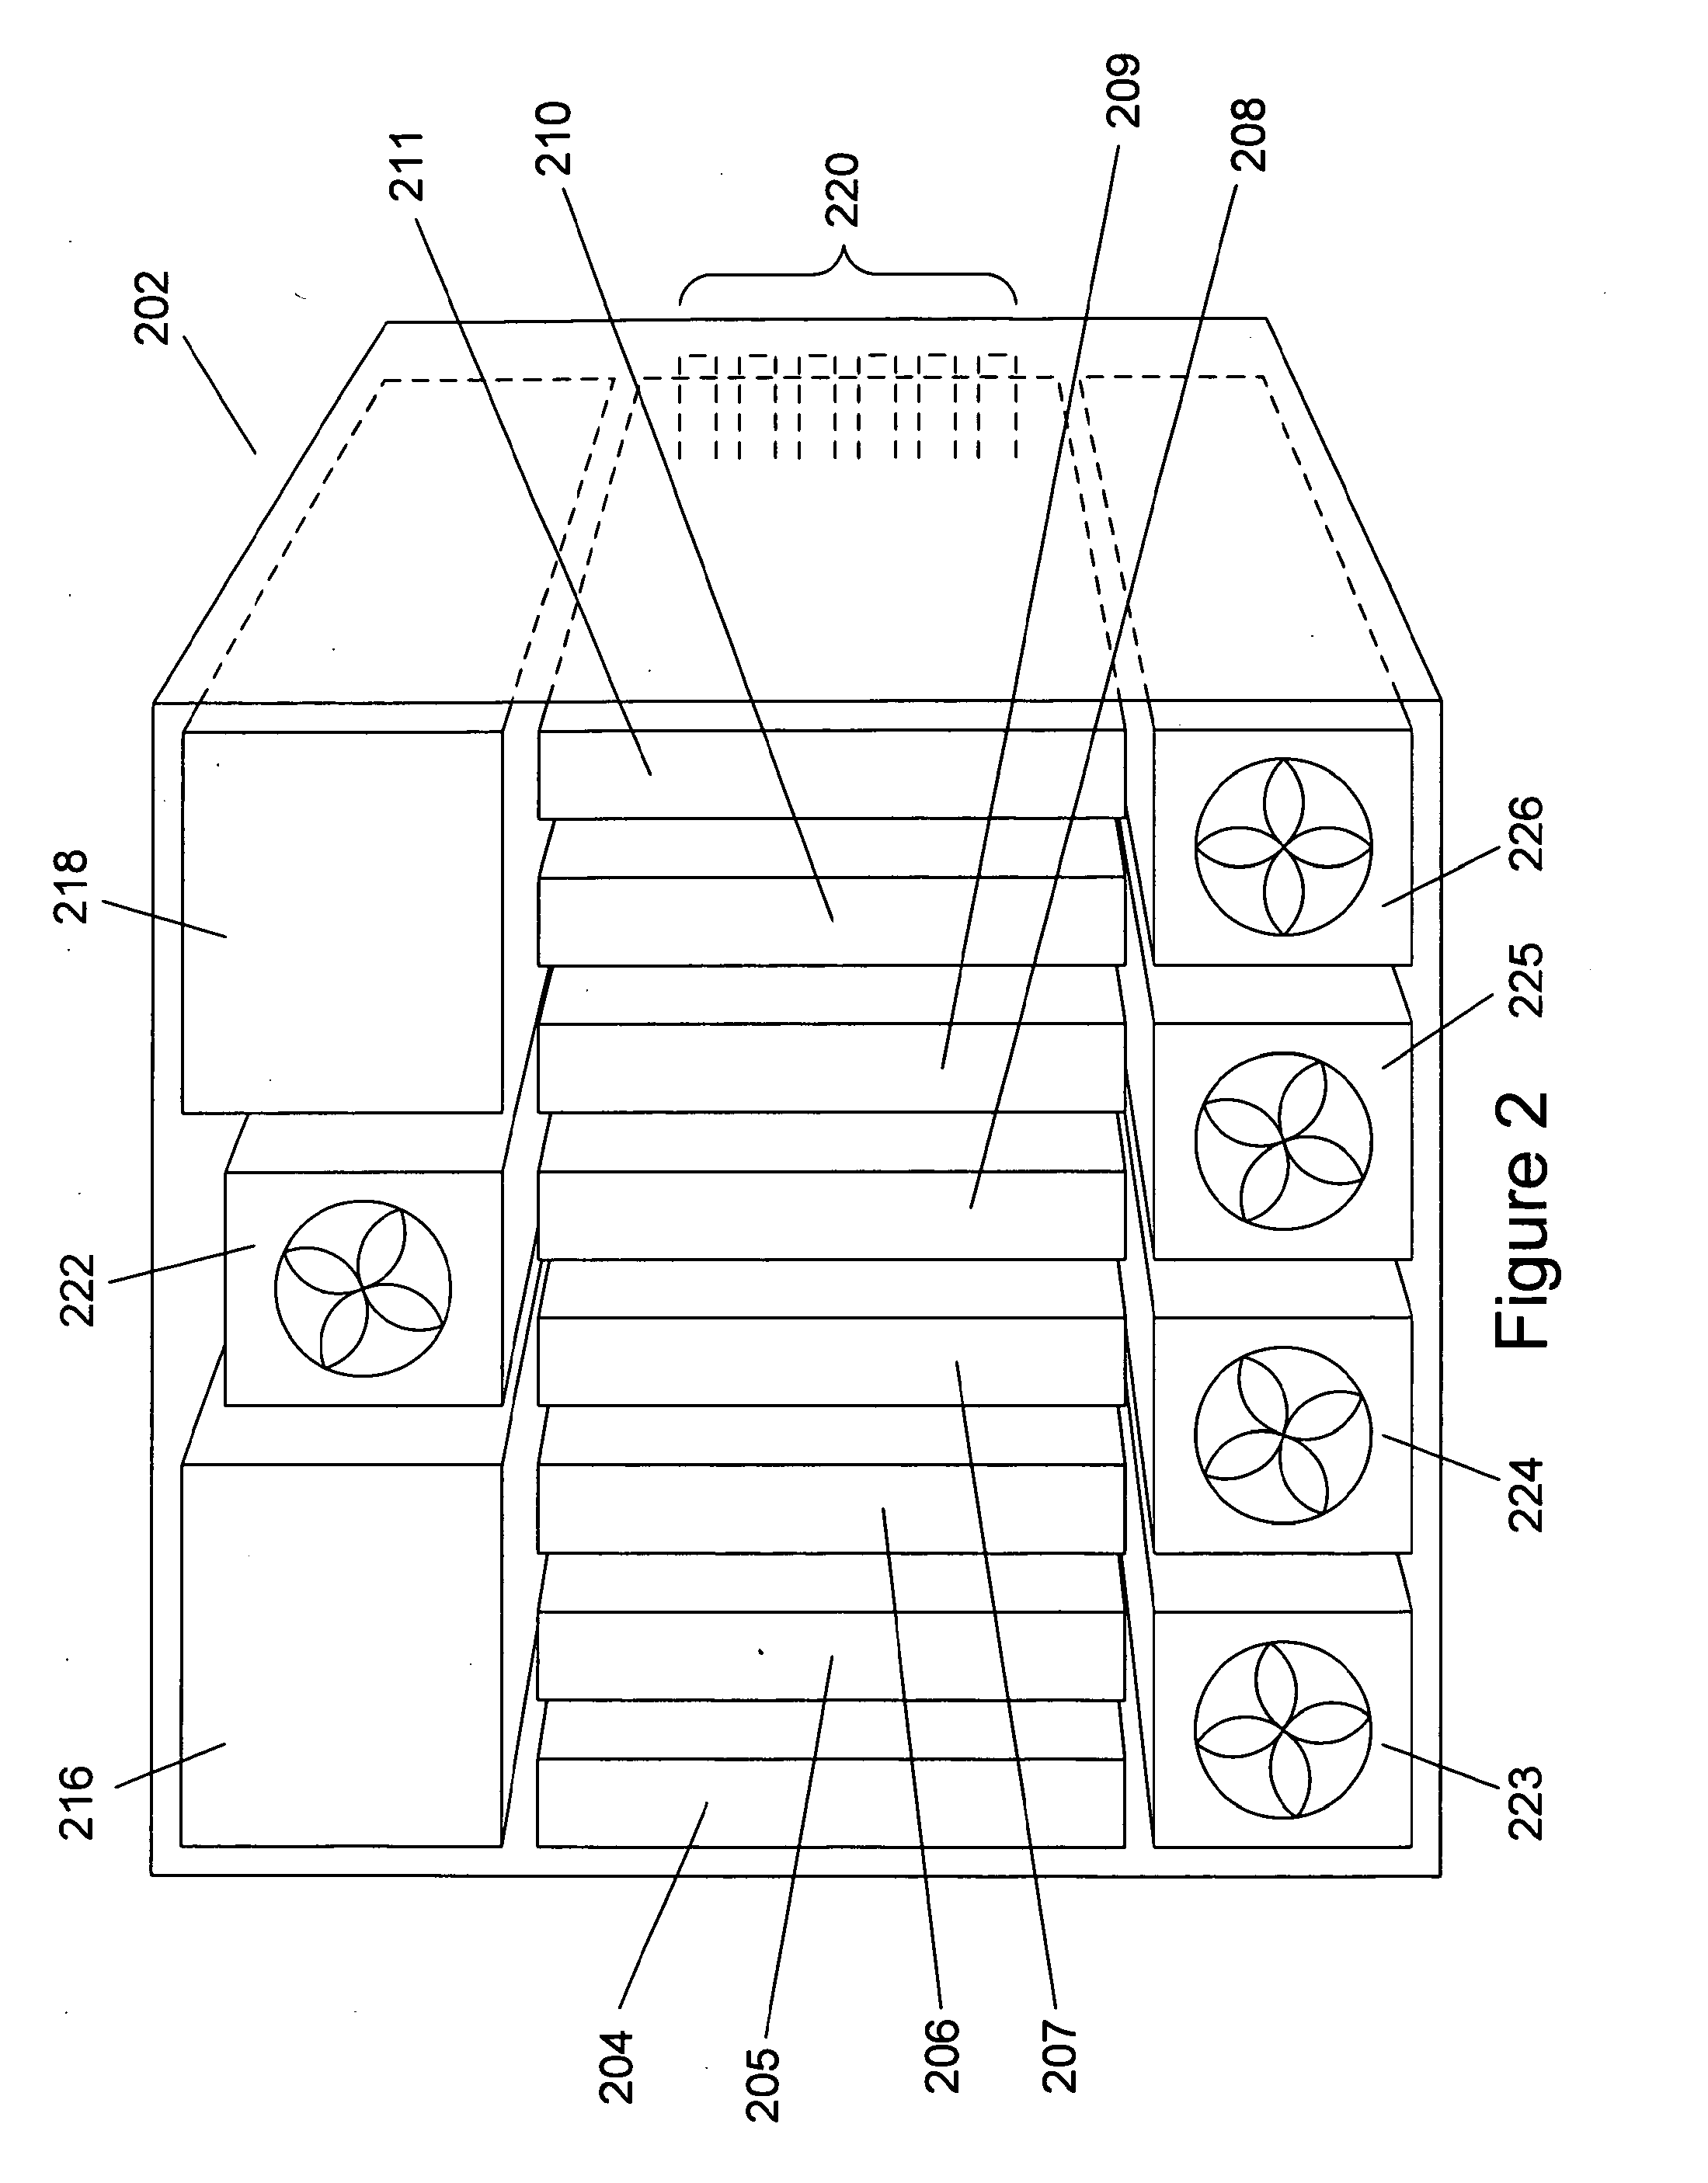 Method and System for Generating and Delivering Inter-Processor Interrupts in a Multi-Core Processor and in Ceterain Shared Memory Multi-Processor Systems